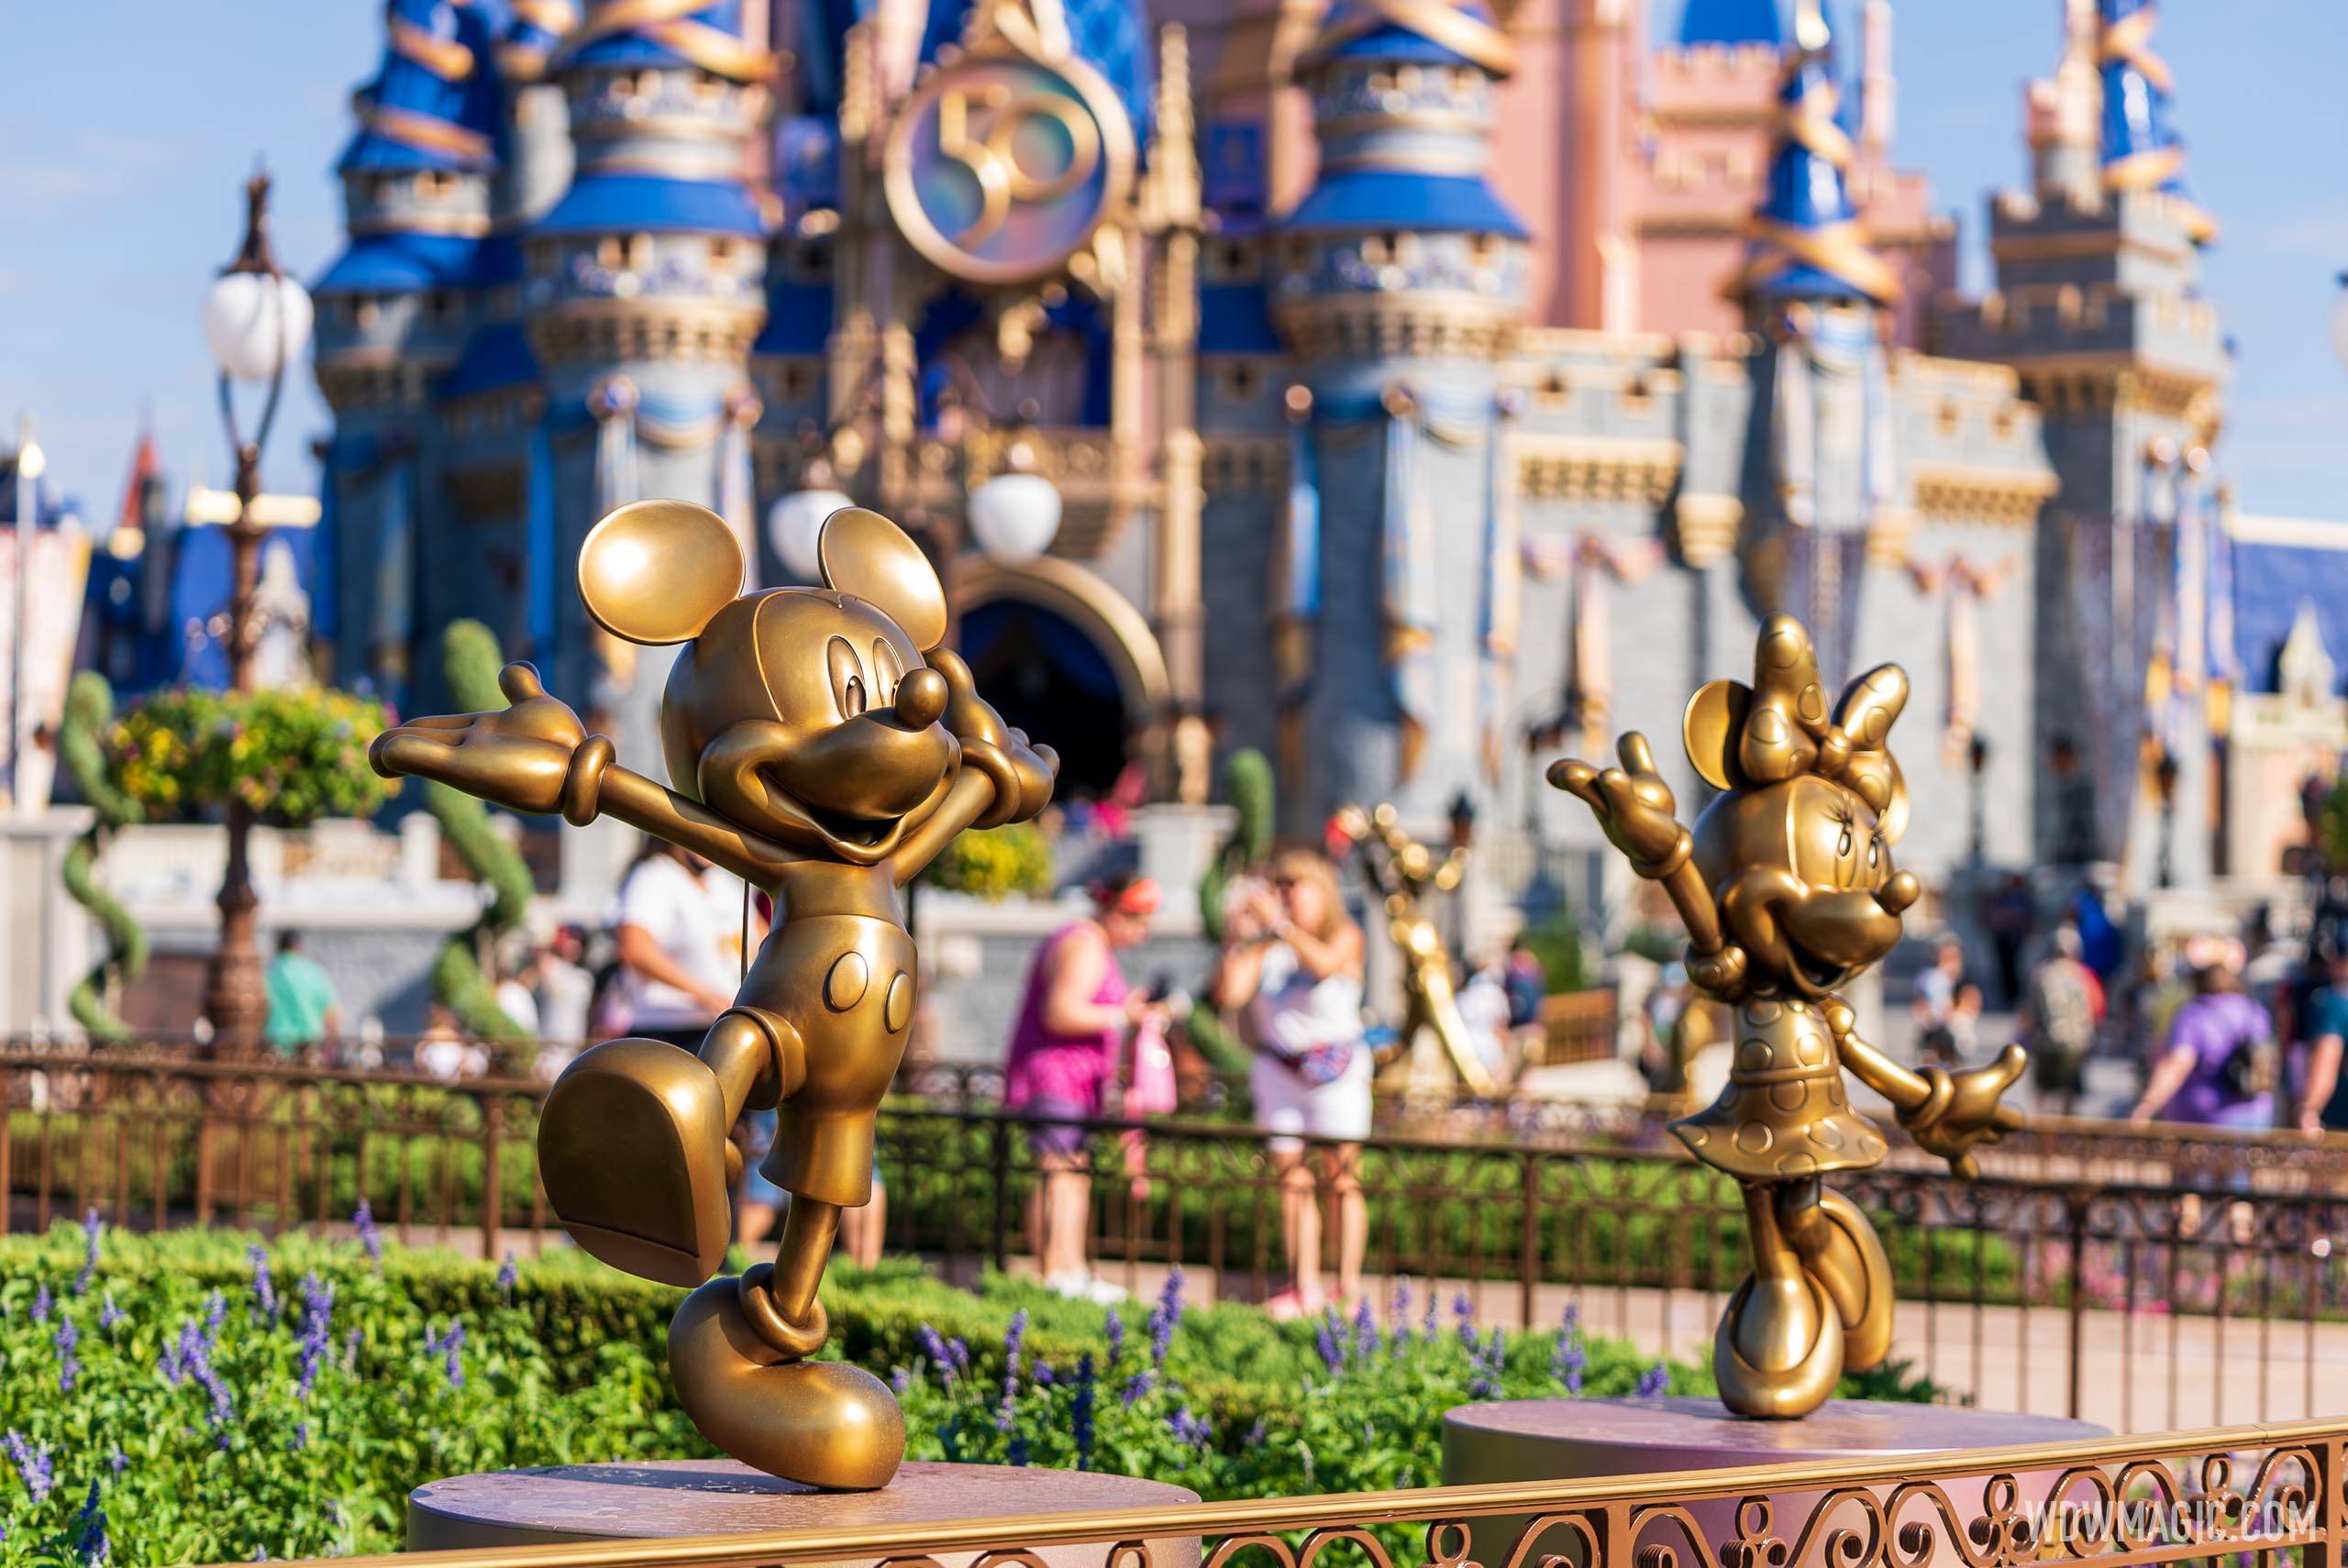 Walt Disney World's Fab 50 character statues to live on beyond the 50th anniversary